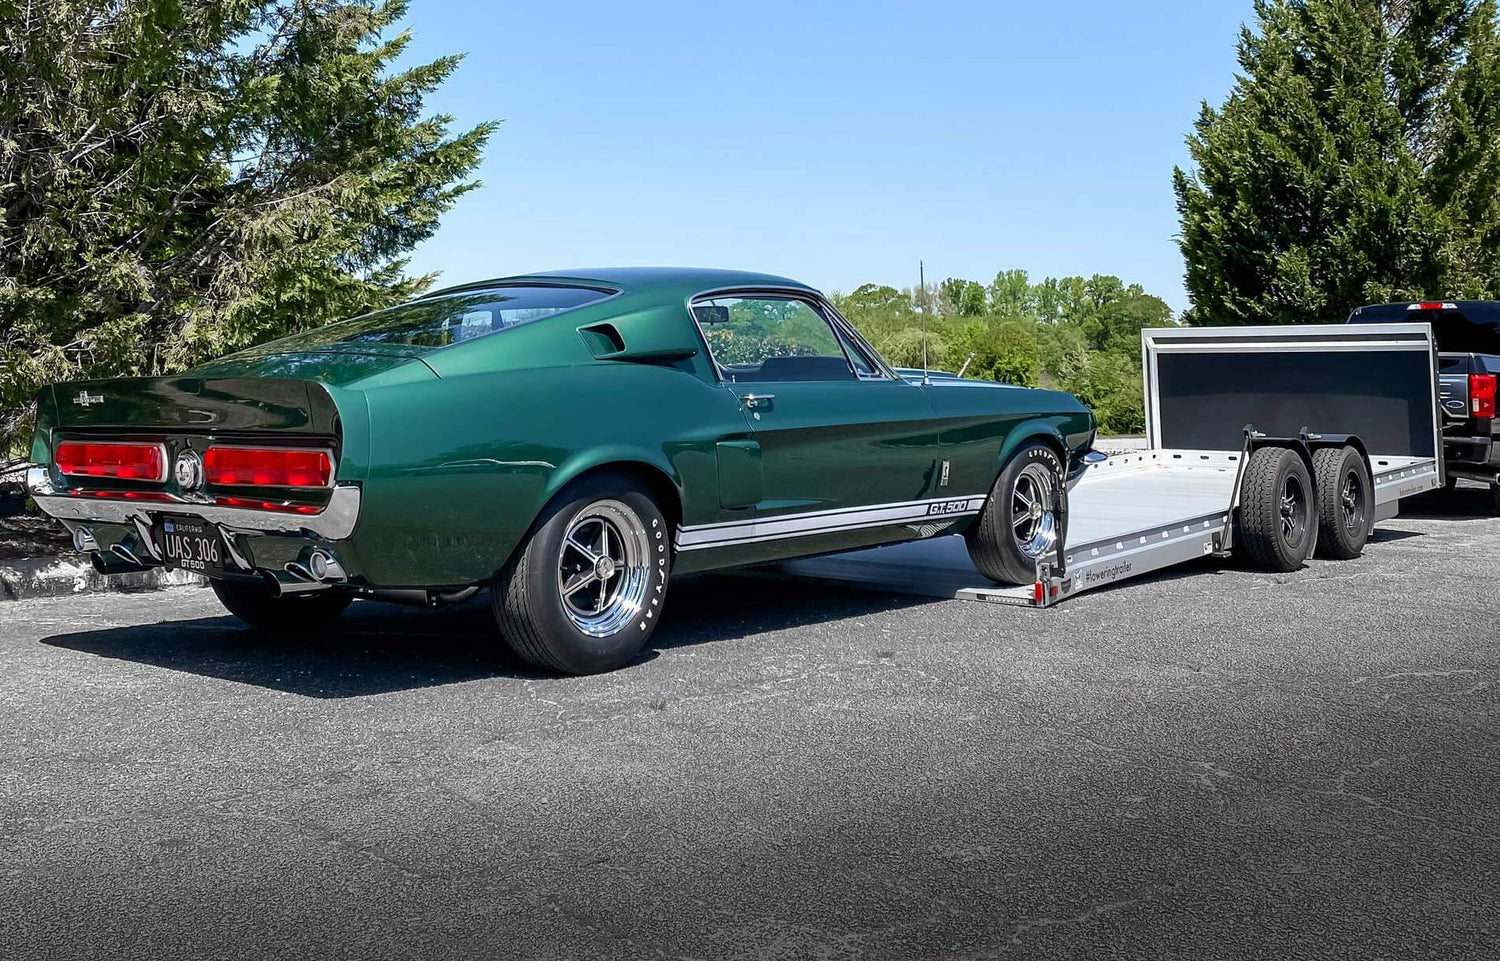 Shelby Mustang driving onto a Futura Trailer